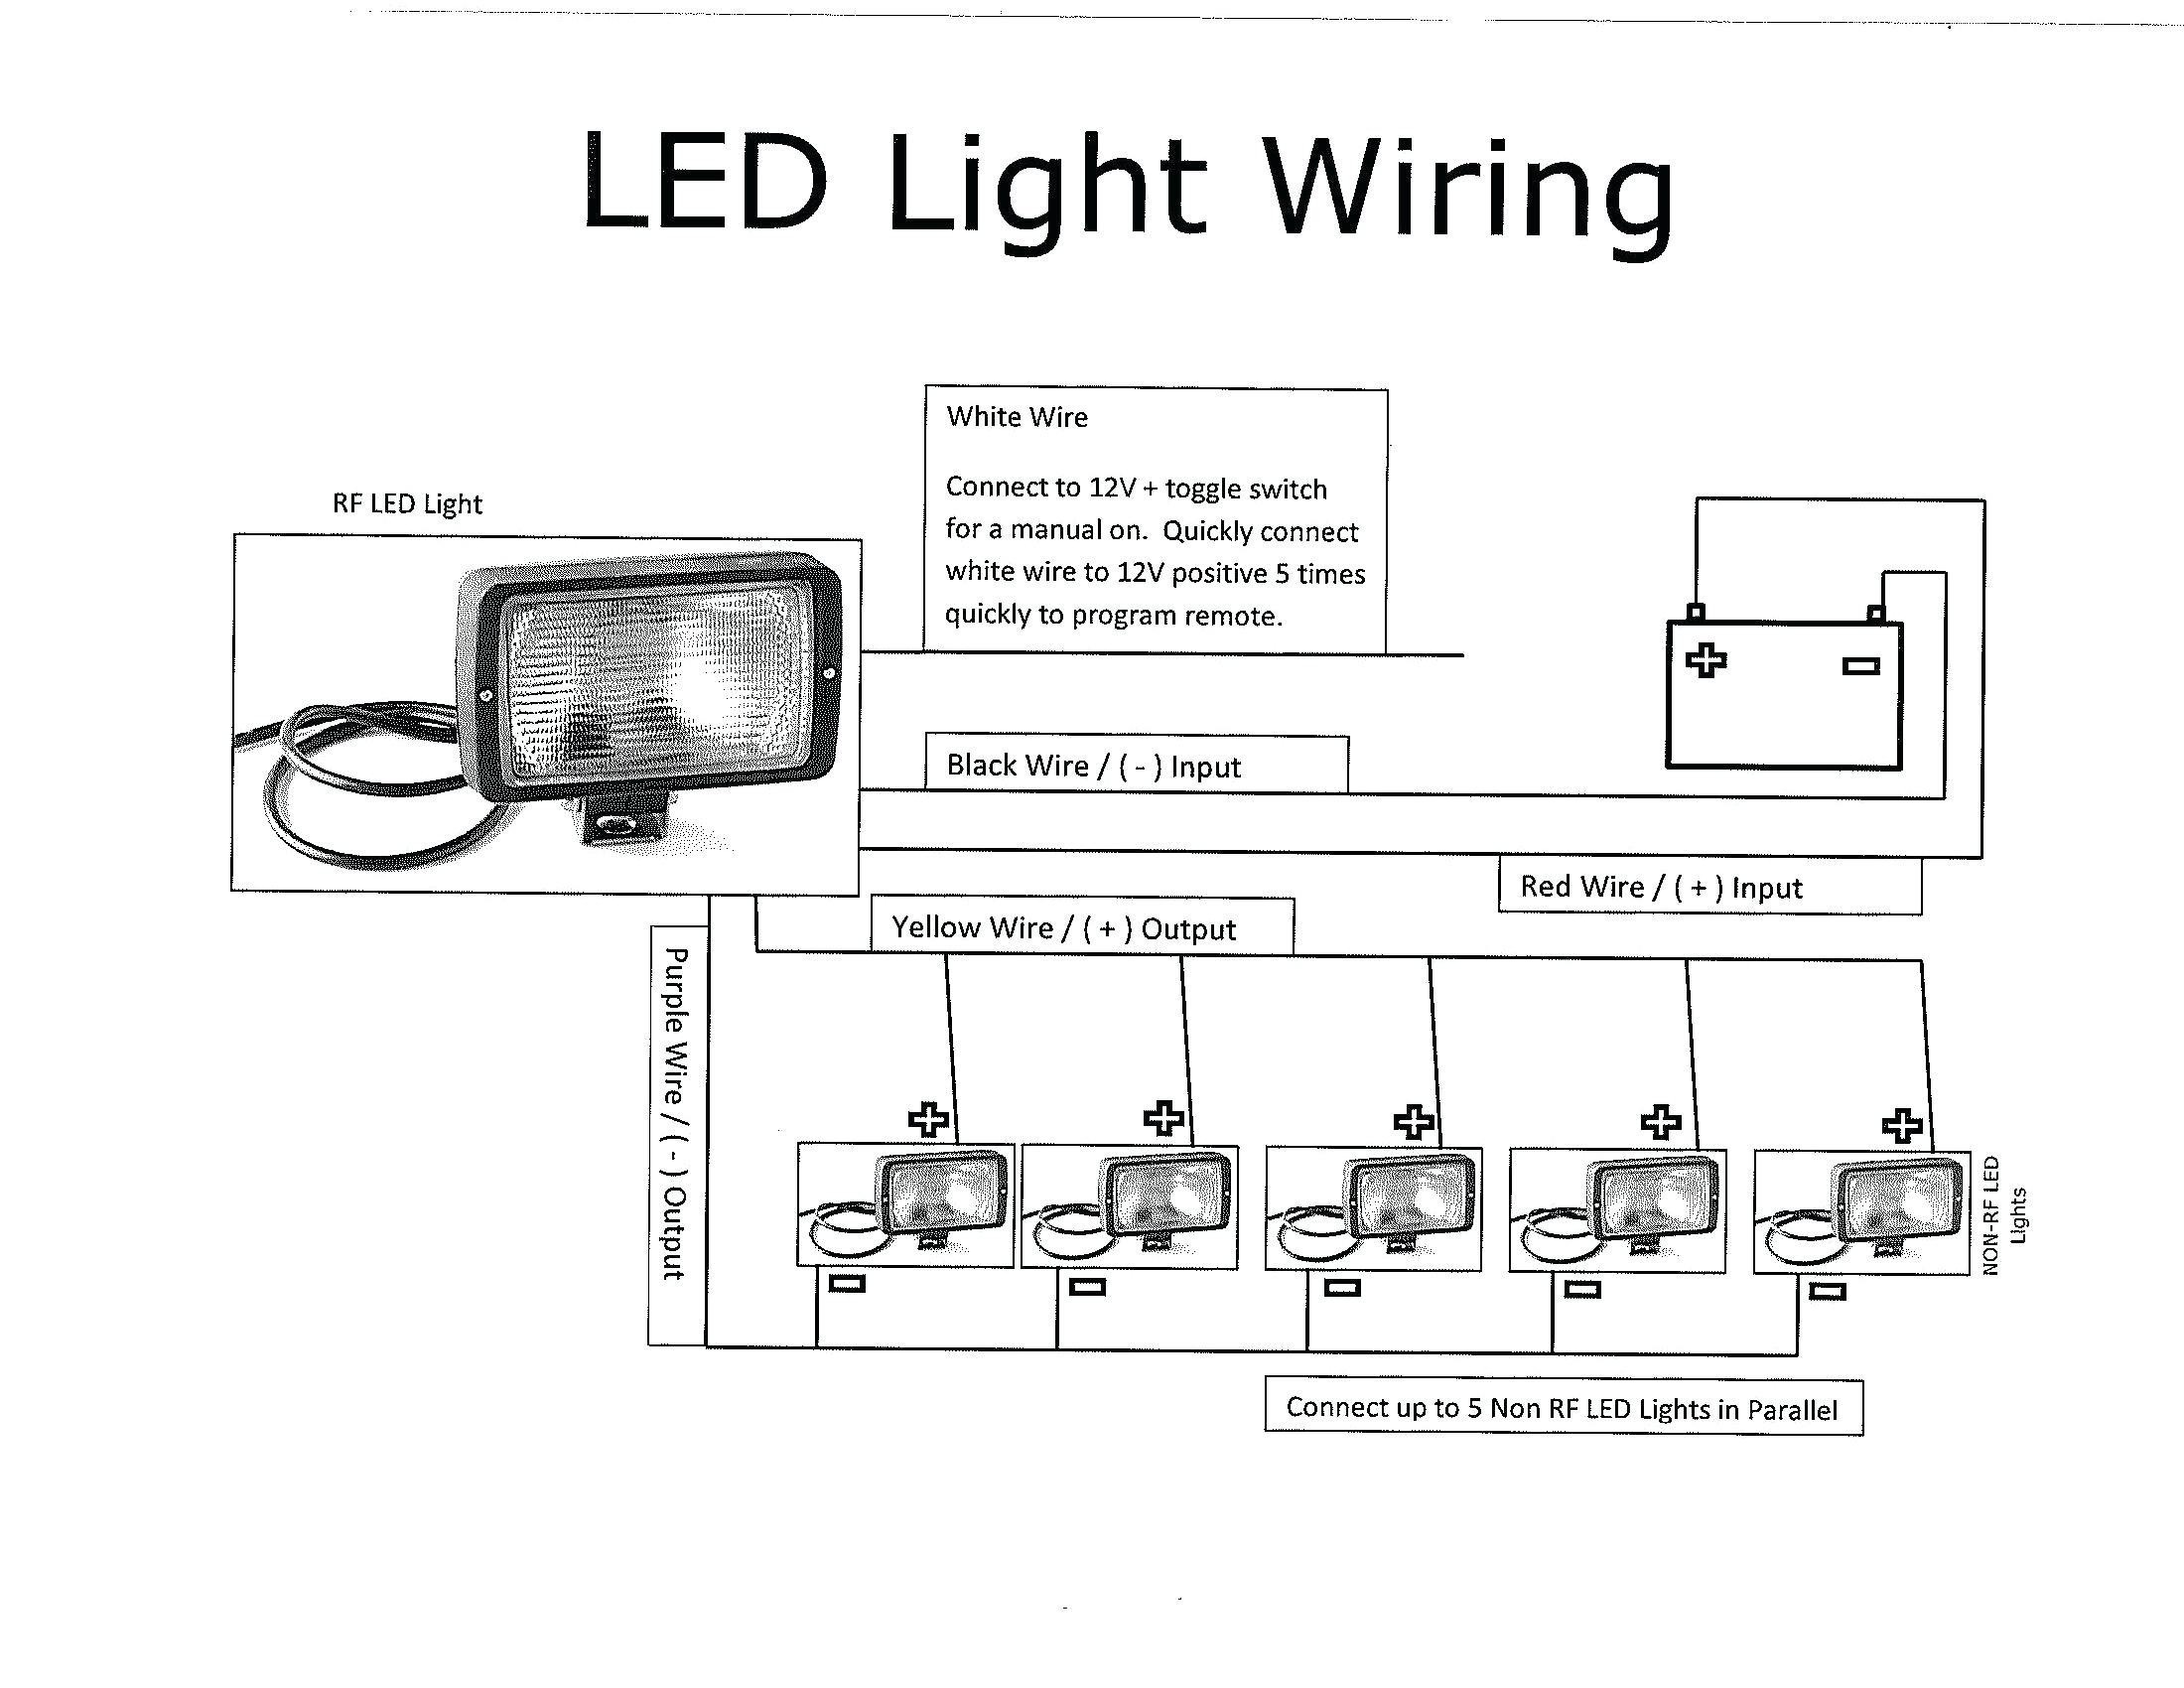 Wiring Diagram For Lights In Parallel Fresh How To Wire Recessed Lighting Diagram New Wiring Diagram Recessed